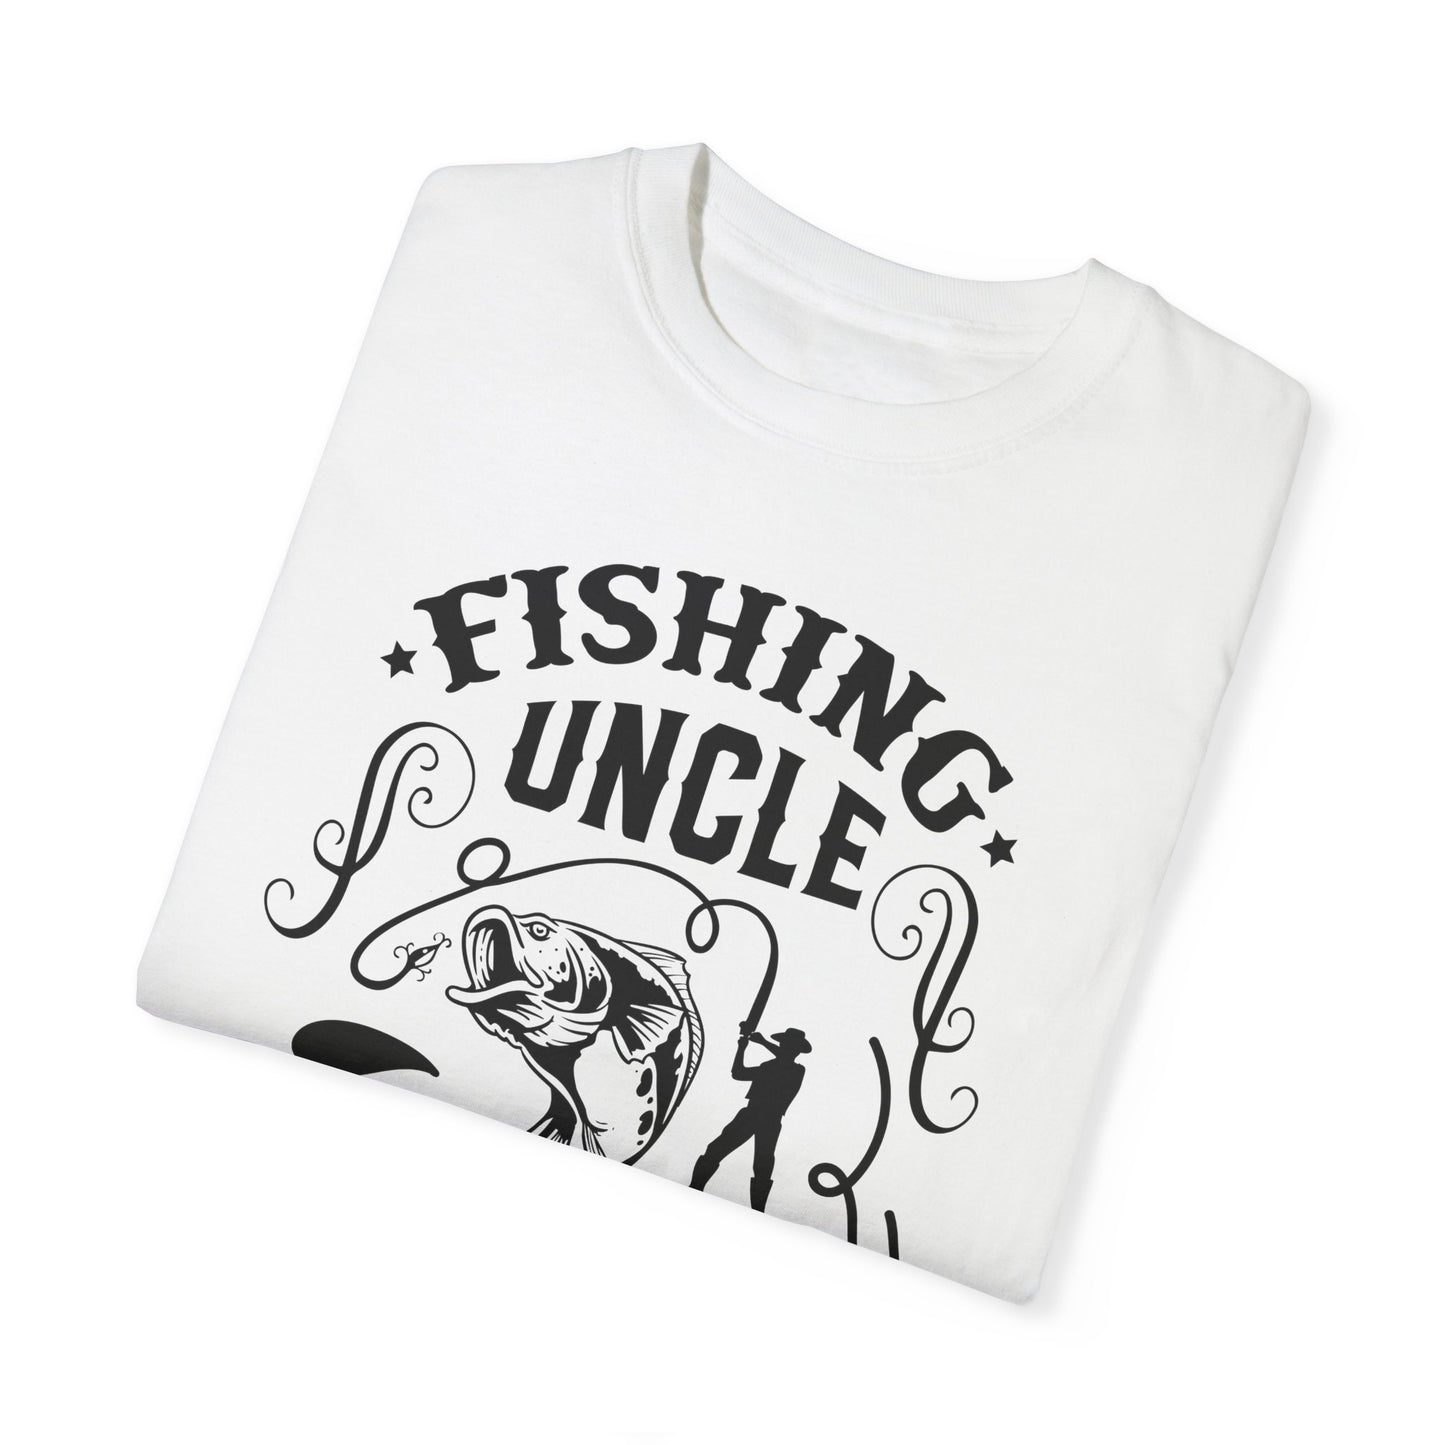 Fishing uncle is cool: Unisex Garment-Dyed T-shirt